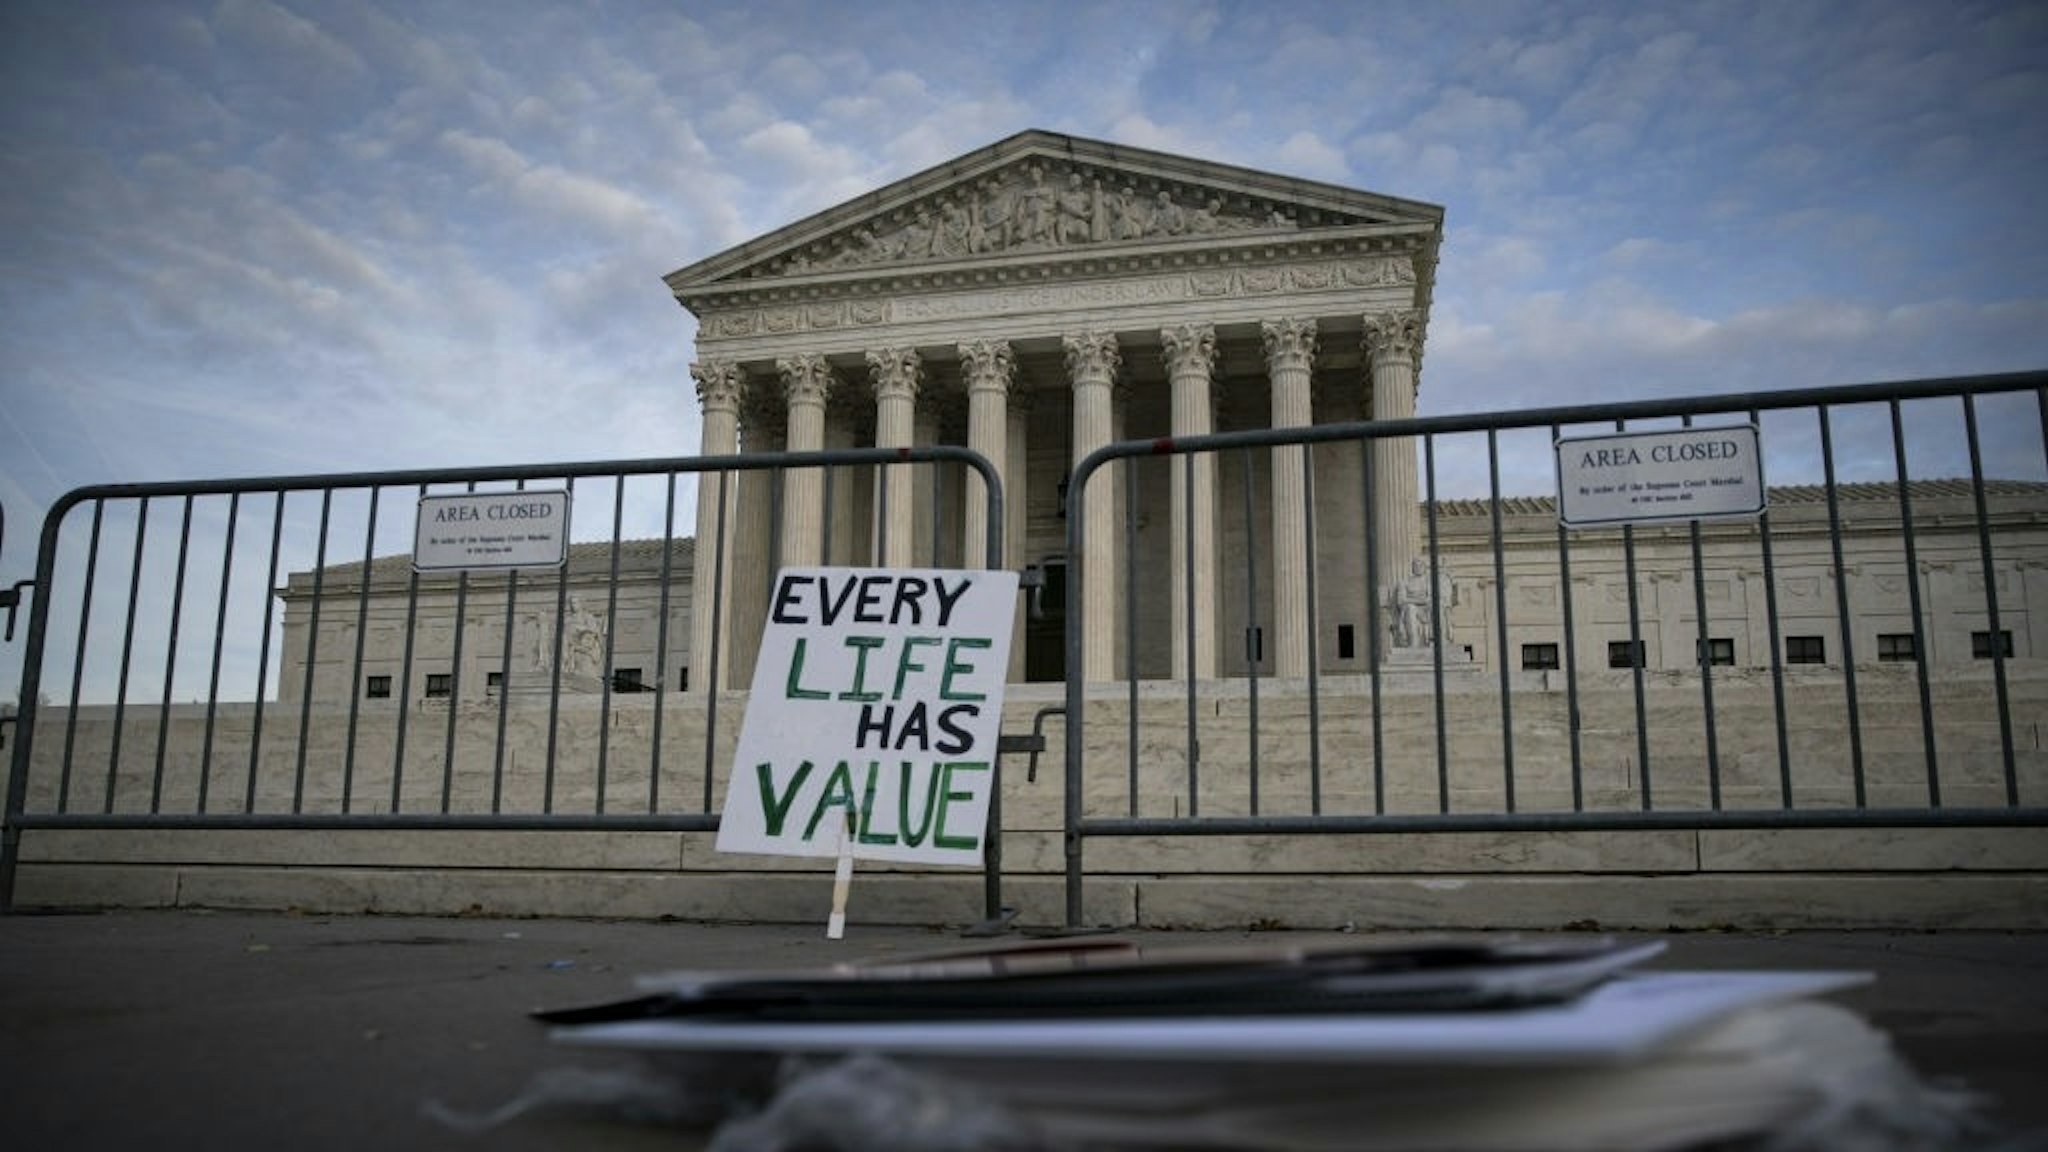 Supreme Court Hears Arguments In Dobbs v. Jackson Women's Health Case An "Every Life Has Value" sign outside the U.S. Supreme Court following oral arguments in the Dobbs v. Jackson Women's Health case in Washington, D.C., U.S., on Wednesday, Dec. 1, 2021. The Supreme Court's conservatives suggested they are poised to slash abortion rights and uphold Mississippi's ban on the procedure after 15 weeks of pregnancy, as the court tackled its most consequential reproductive-rights case in a generation. Photographer: Al Drago/Bloomberg via Getty Images Bloomberg / Contributor